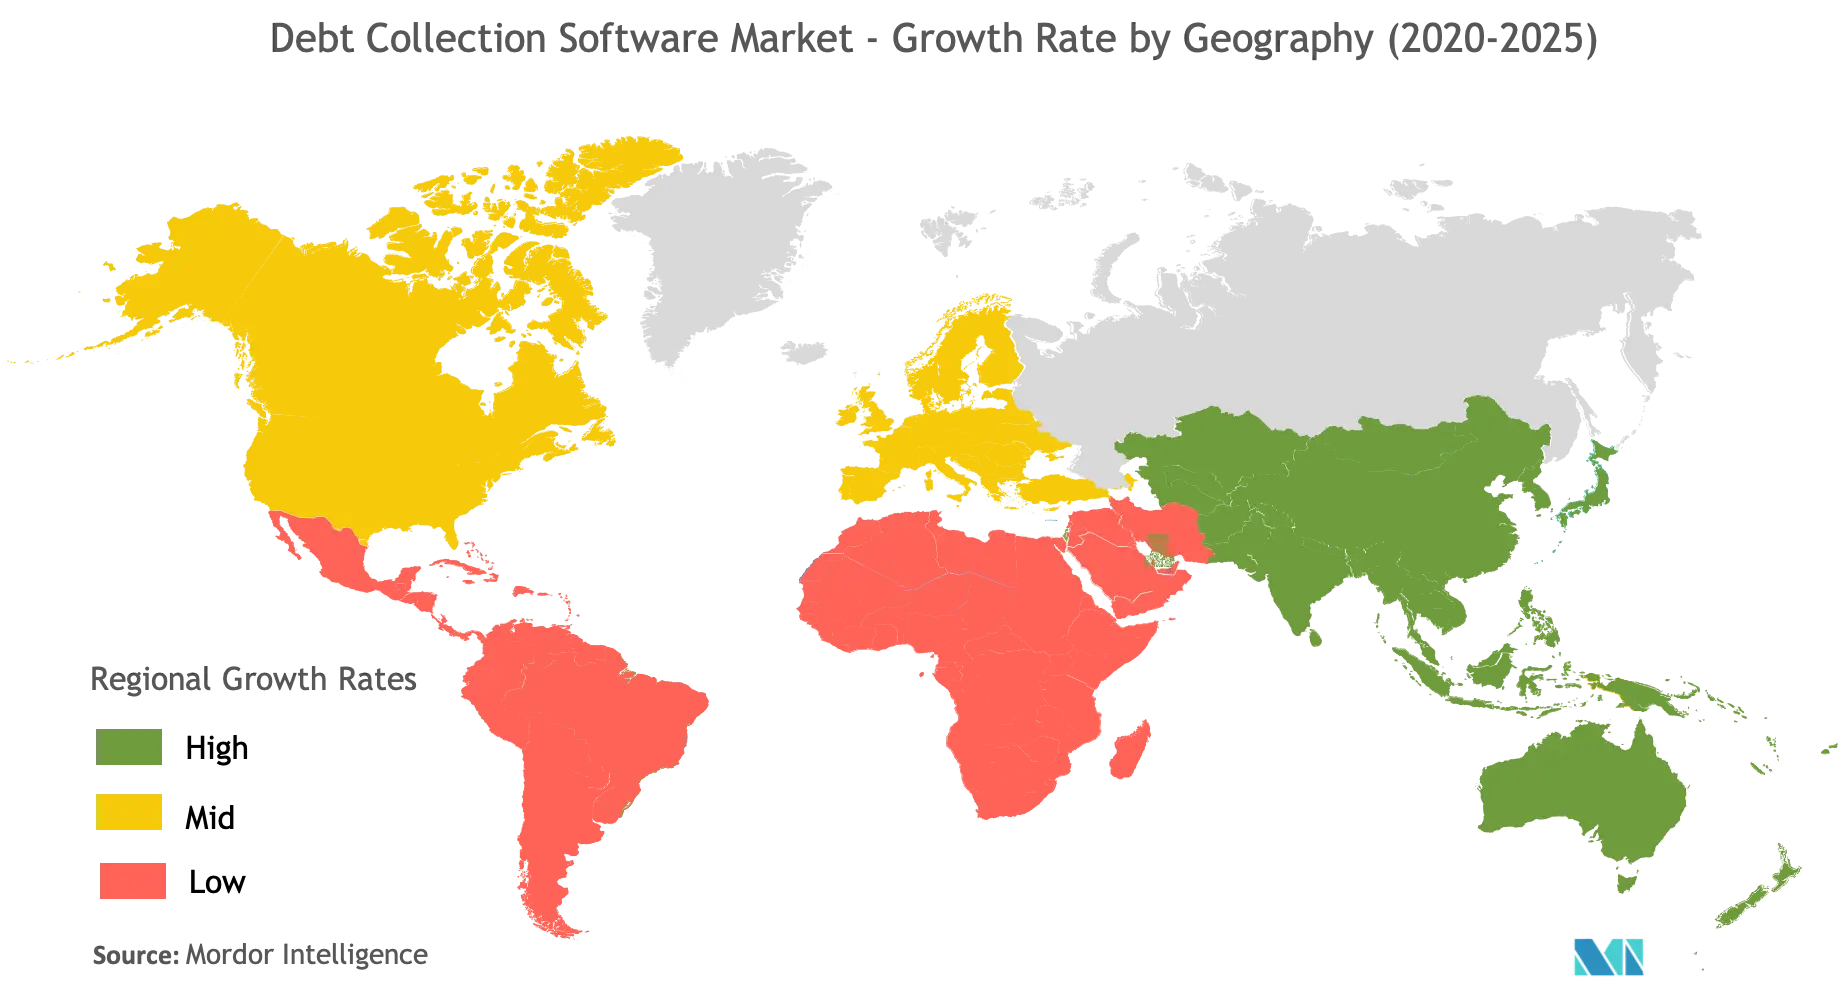 Debt Collection Software Market - Growth Rate by Geography (2020 - 2025)